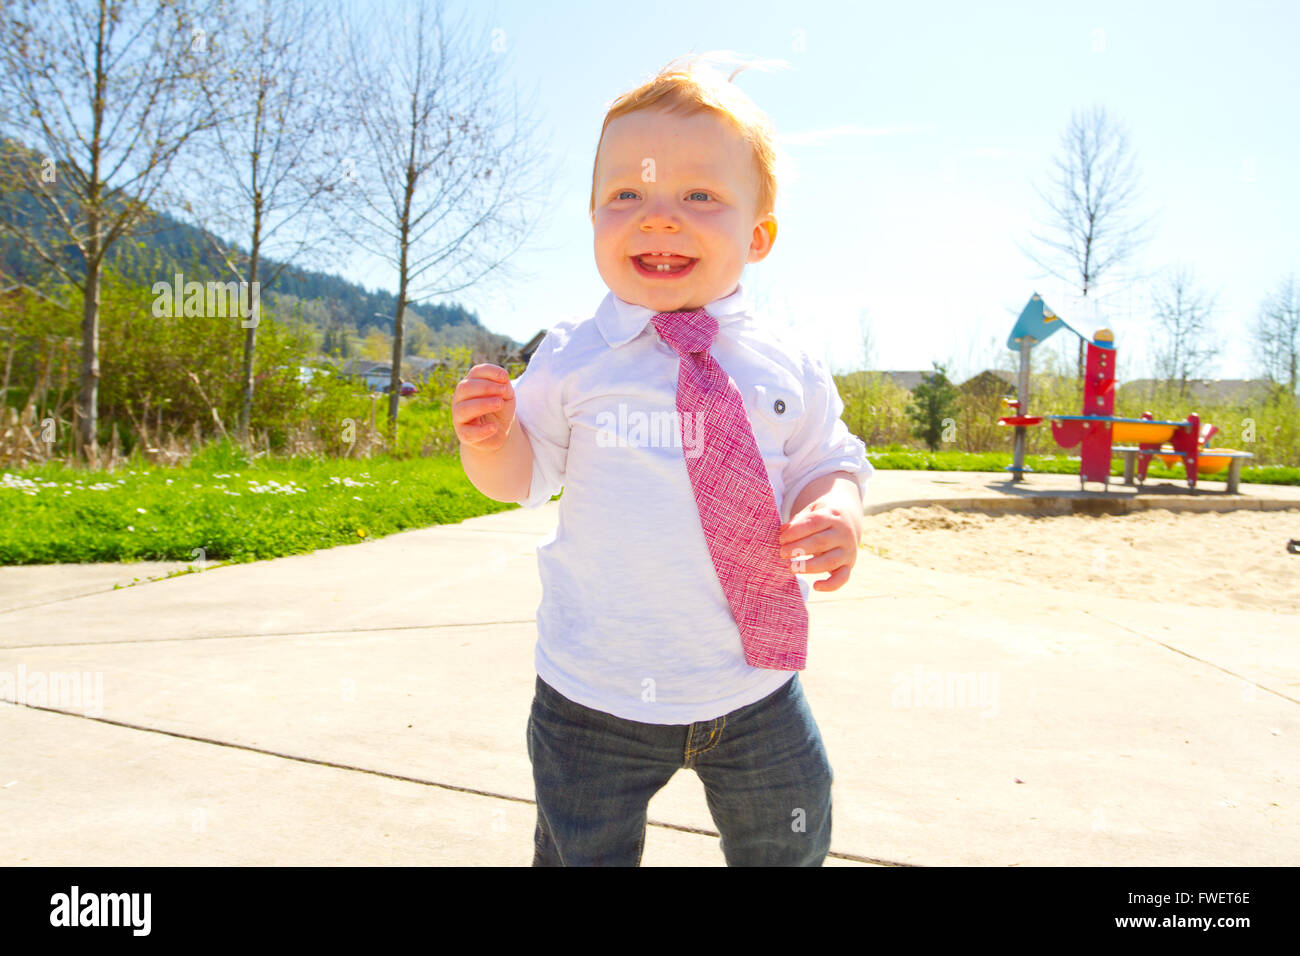 A baby boy plays at the park wearing his Sunday's best clothes including a tie around his neck. Stock Photo